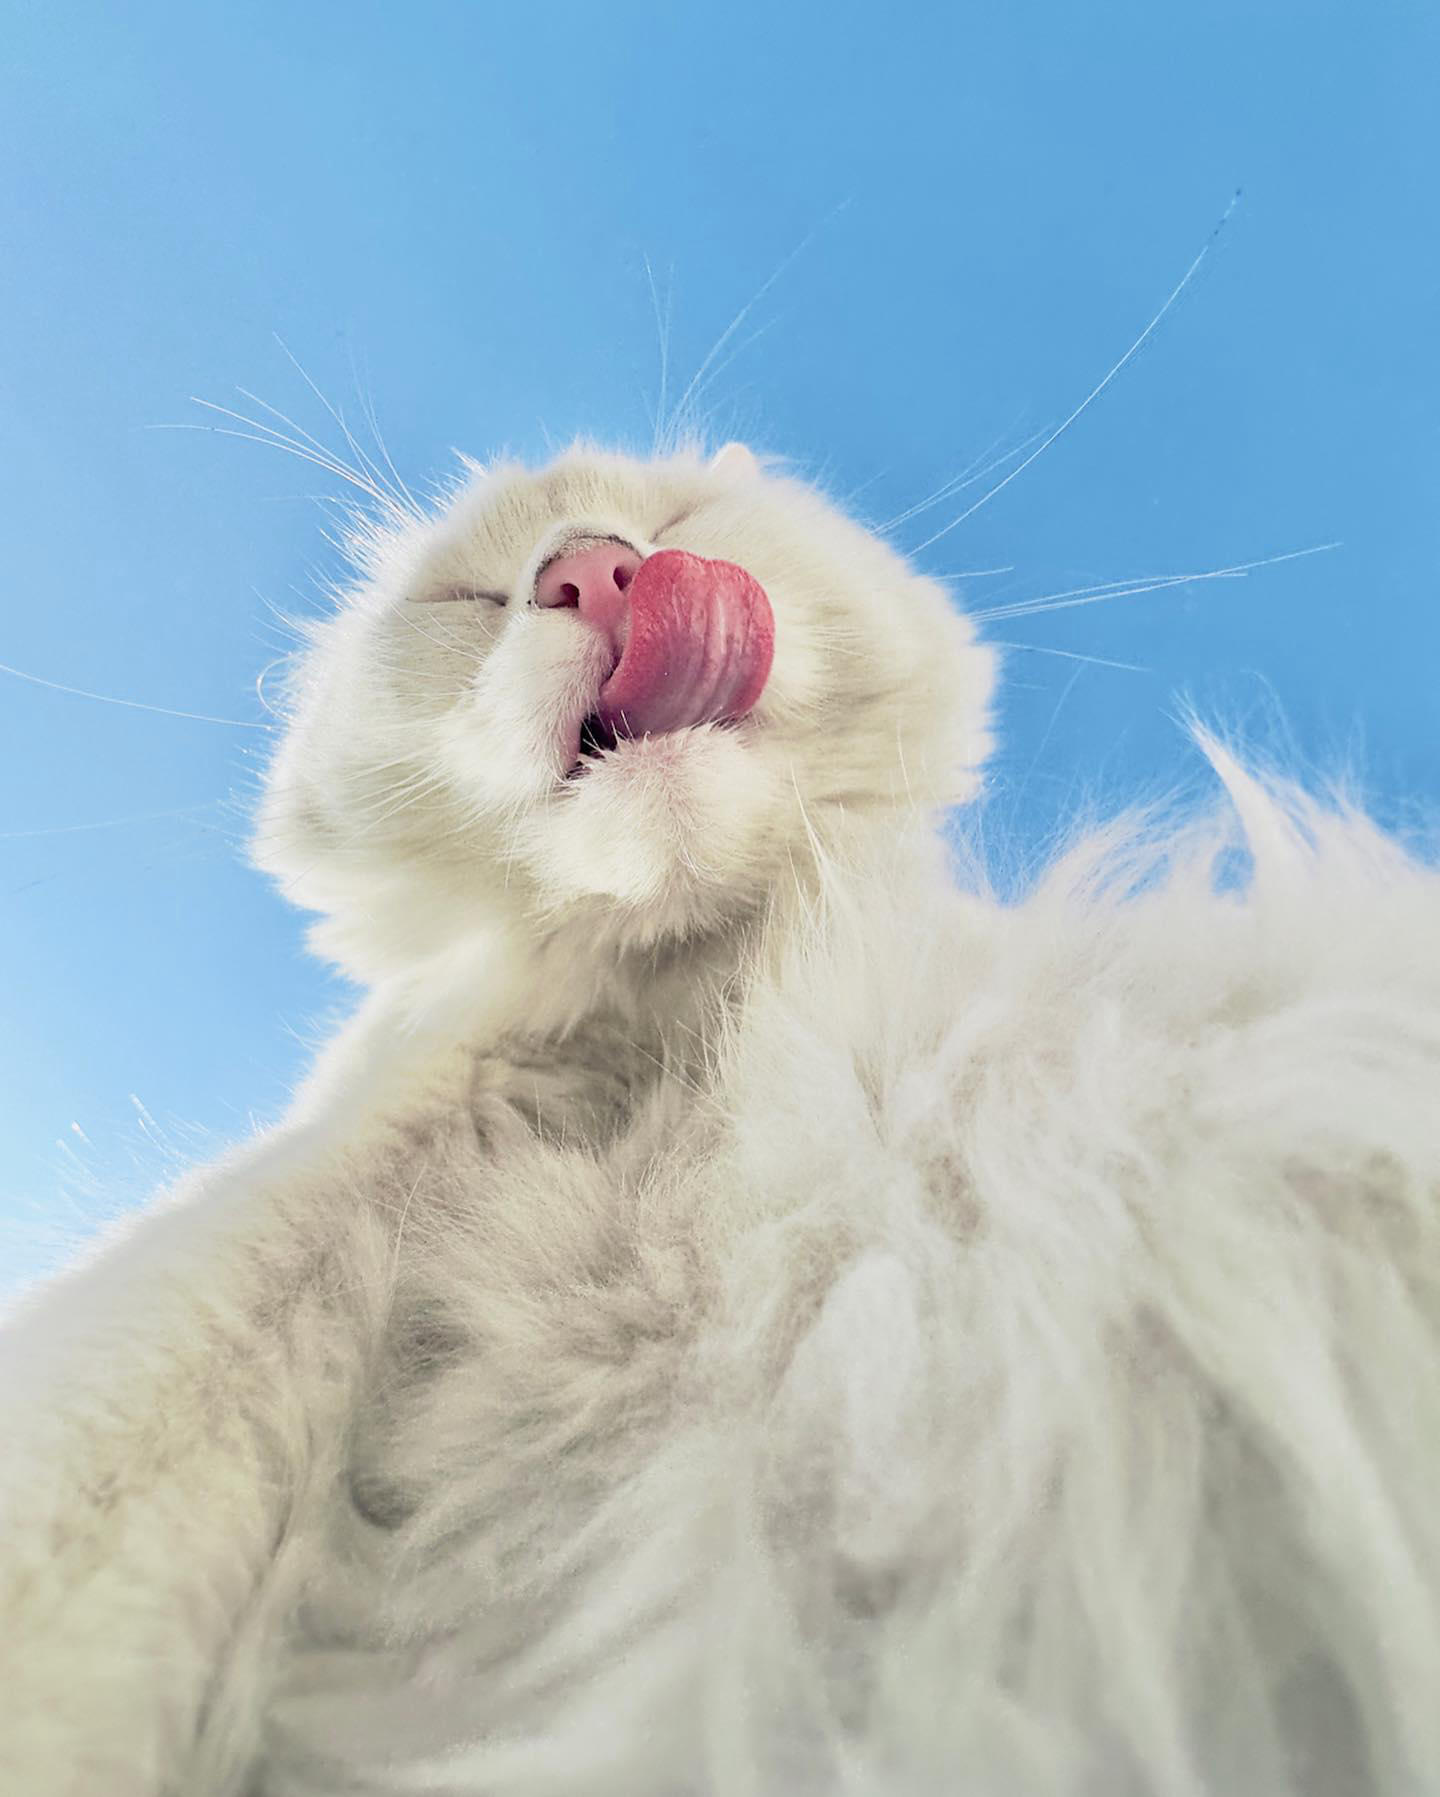 “My goal was to make the viewer feel like the cat was taking a selfie